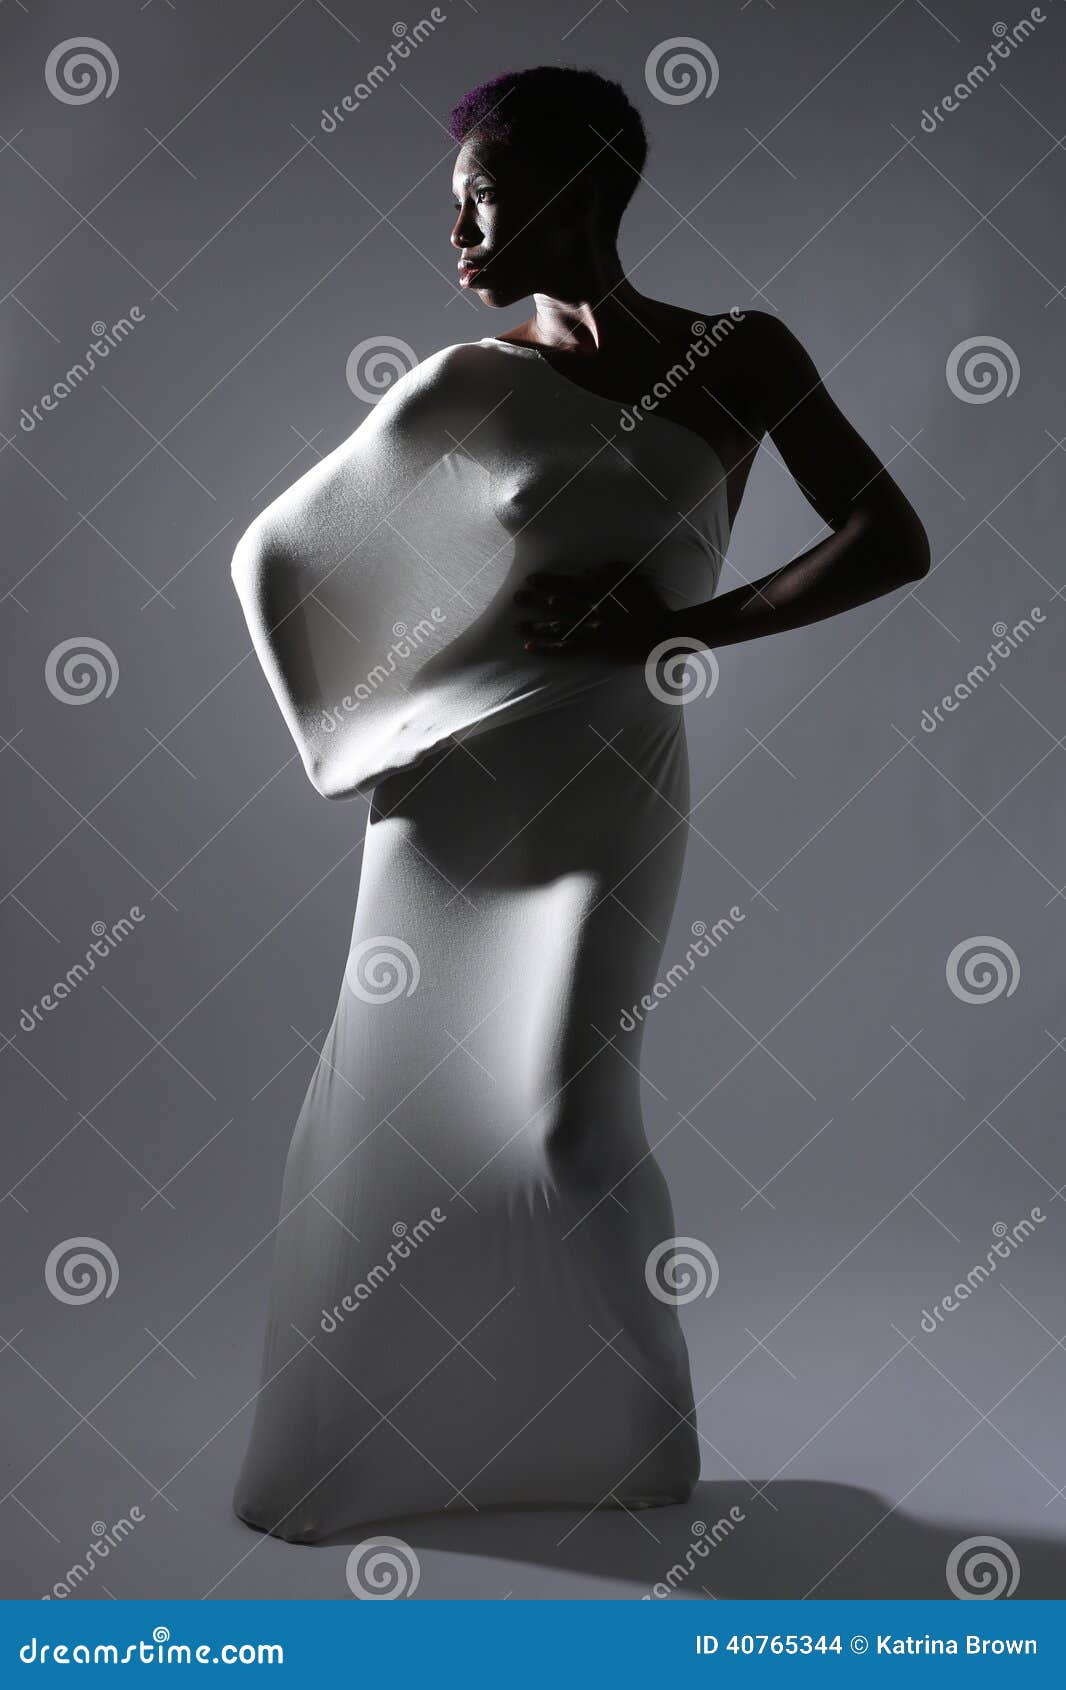 ly woman in creative light and spandex fabric